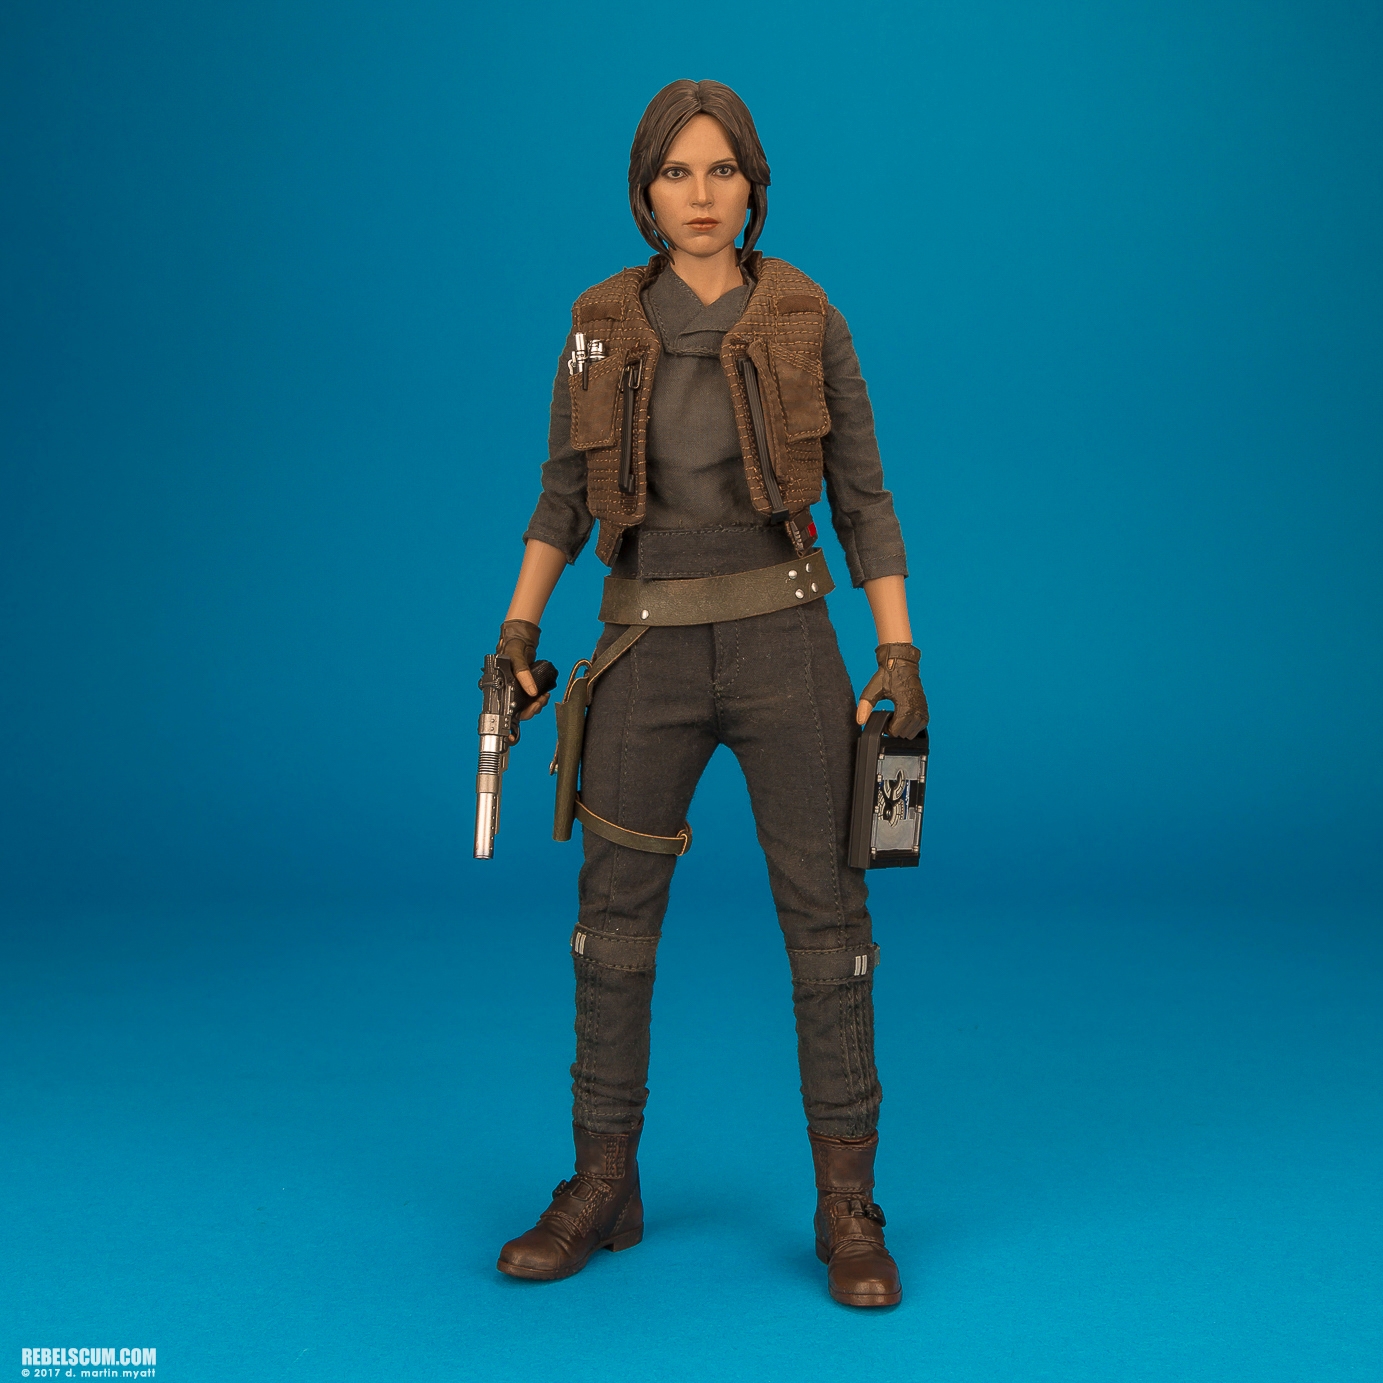 MMS405-Jyn-Erso-Deluxe-Star-Wars-Rogue-One-Hot-Toys-054.jpg